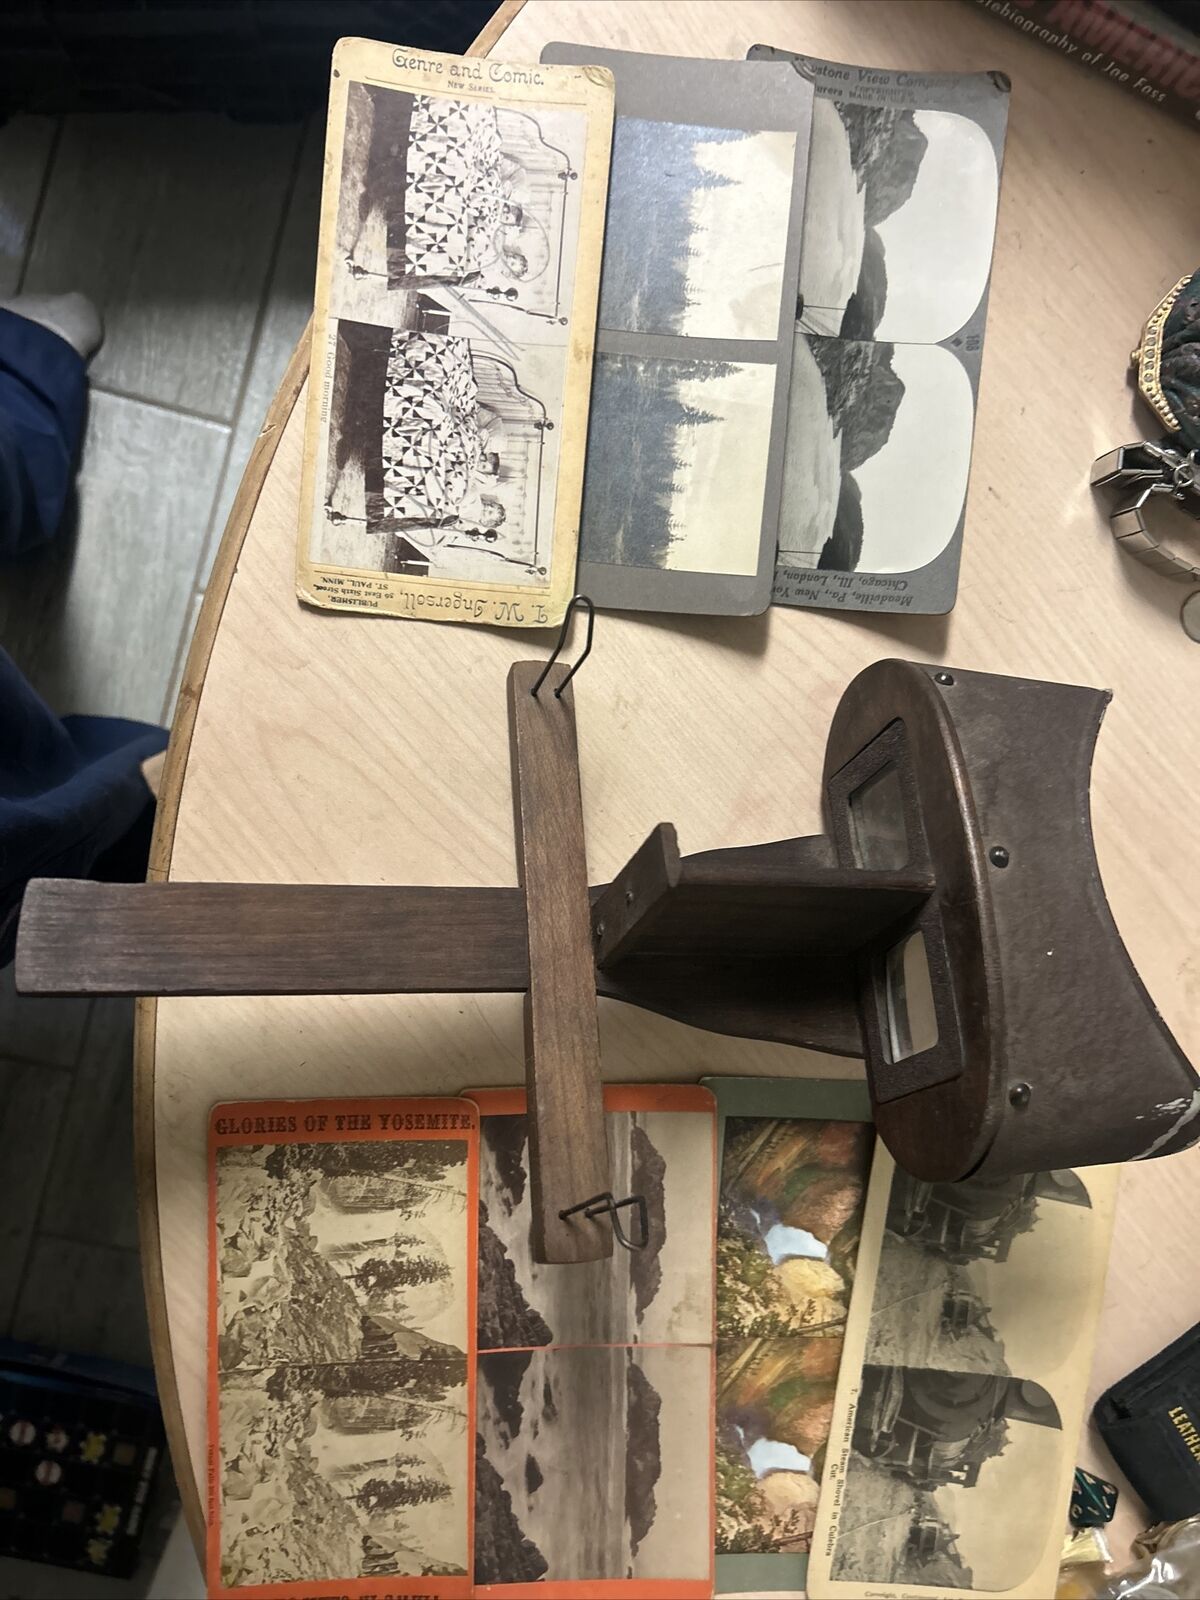 Antique stereoscope viewer and images